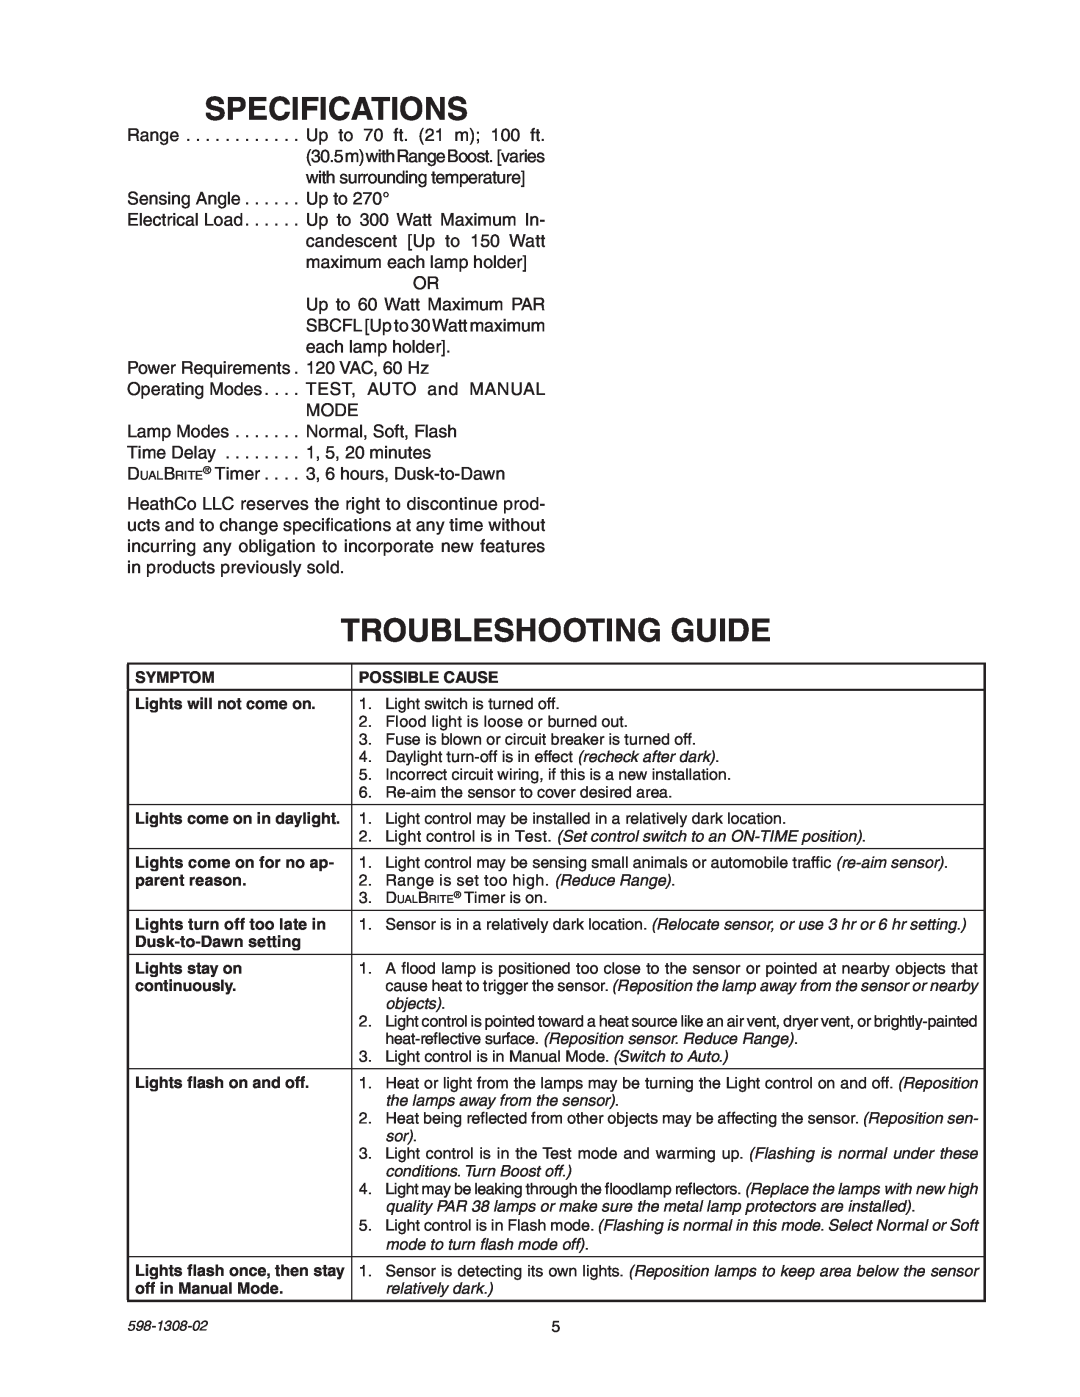 Heath Zenith 5718 manual Specifications, Troubleshooting Guide 